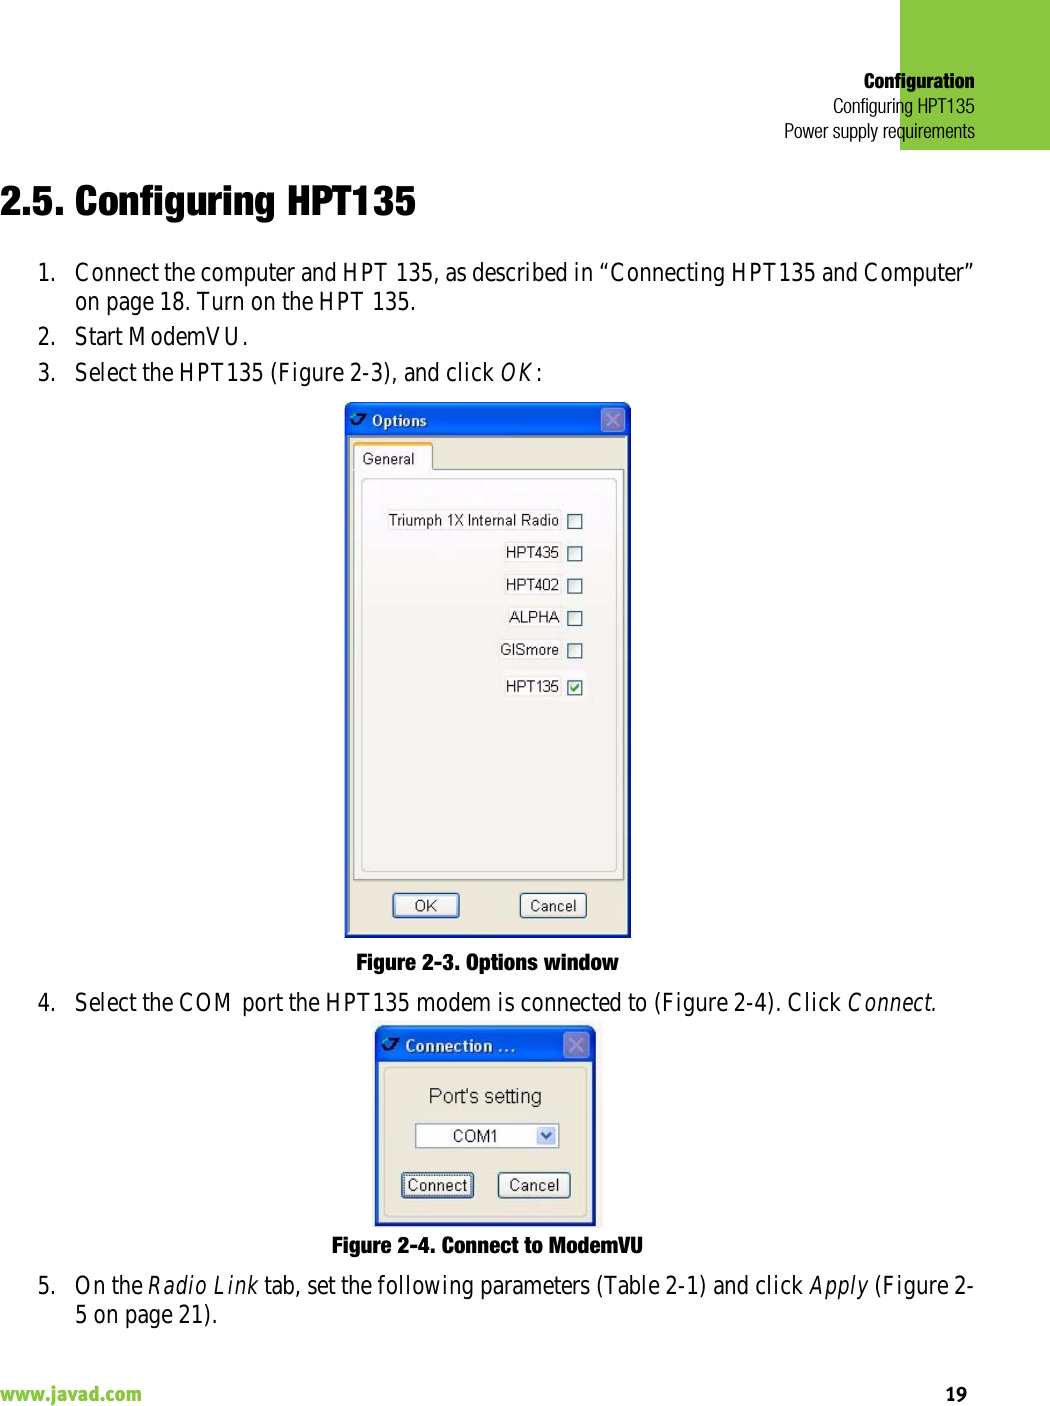 ConfigurationConfiguring HPT135Power supply requirements19www.javad.com                                                                                                                                                    2.5. Configuring HPT1351. Connect the computer and HPT 135, as described in “Connecting HPT135 and Computer”on page 18. Turn on the HPT 135.2. Start ModemVU. 3. Select the HPT135 (Figure 2-3), and click OK:Figure 2-3. Options window4. Select the COM port the HPT135 modem is connected to (Figure 2-4). Click Connect.Figure 2-4. Connect to ModemVU5. On the Radio Link tab, set the following parameters (Table 2-1) and click Apply (Figure 2-5 on page 21).